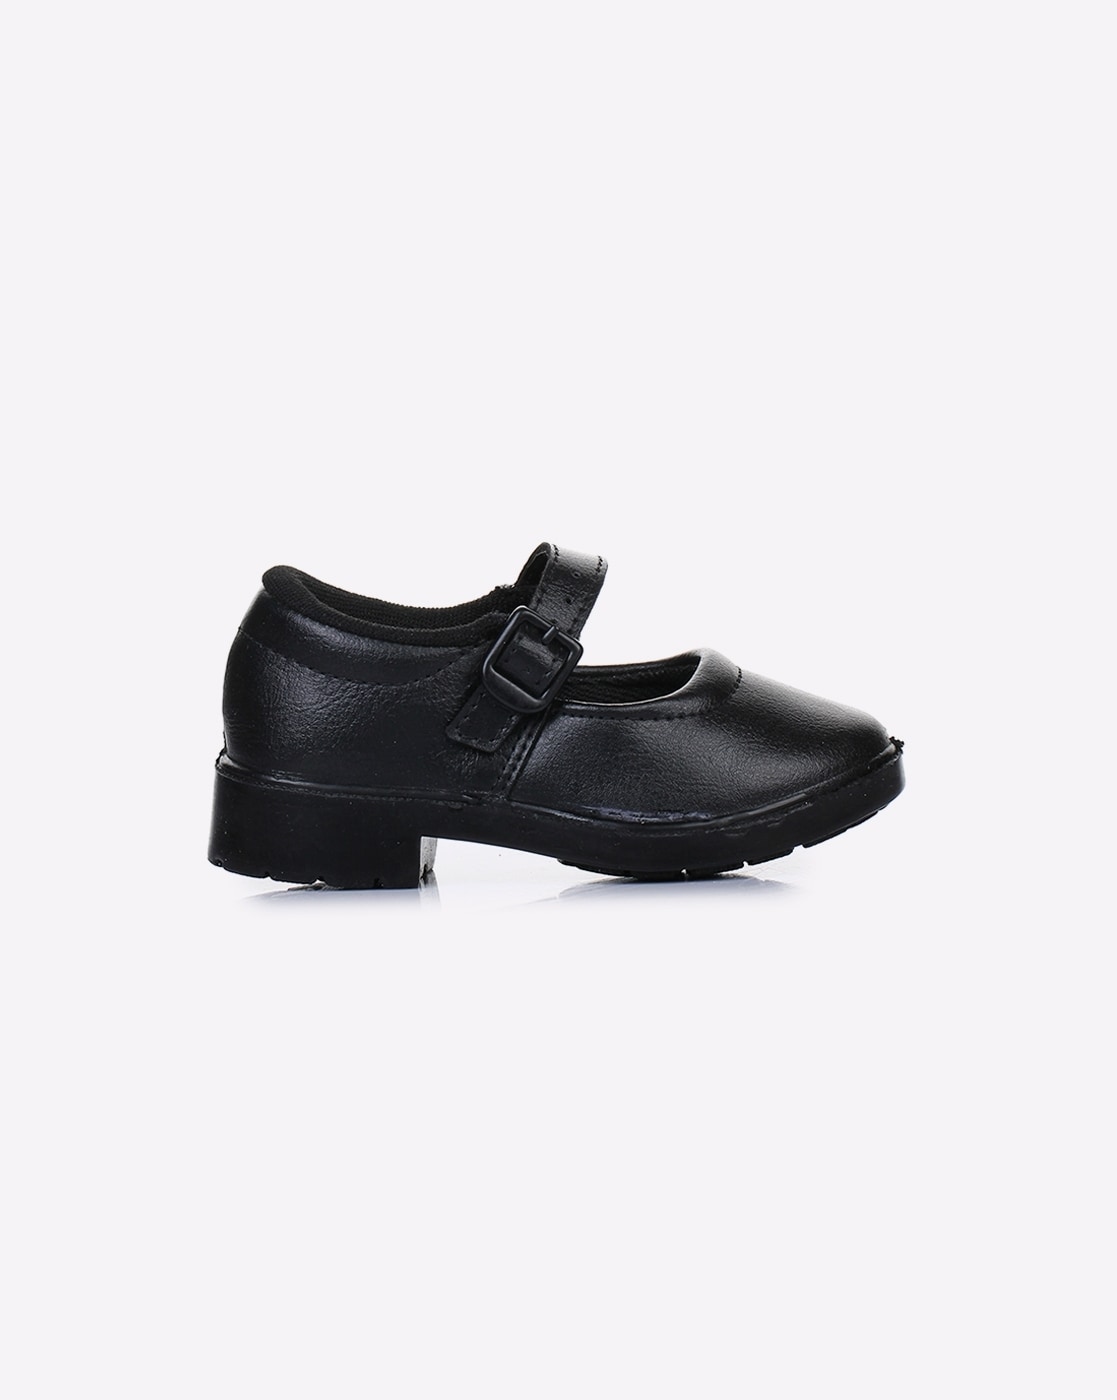 Skystep School Shoes For Girl With Black Colour JioMart | lupon.gov.ph